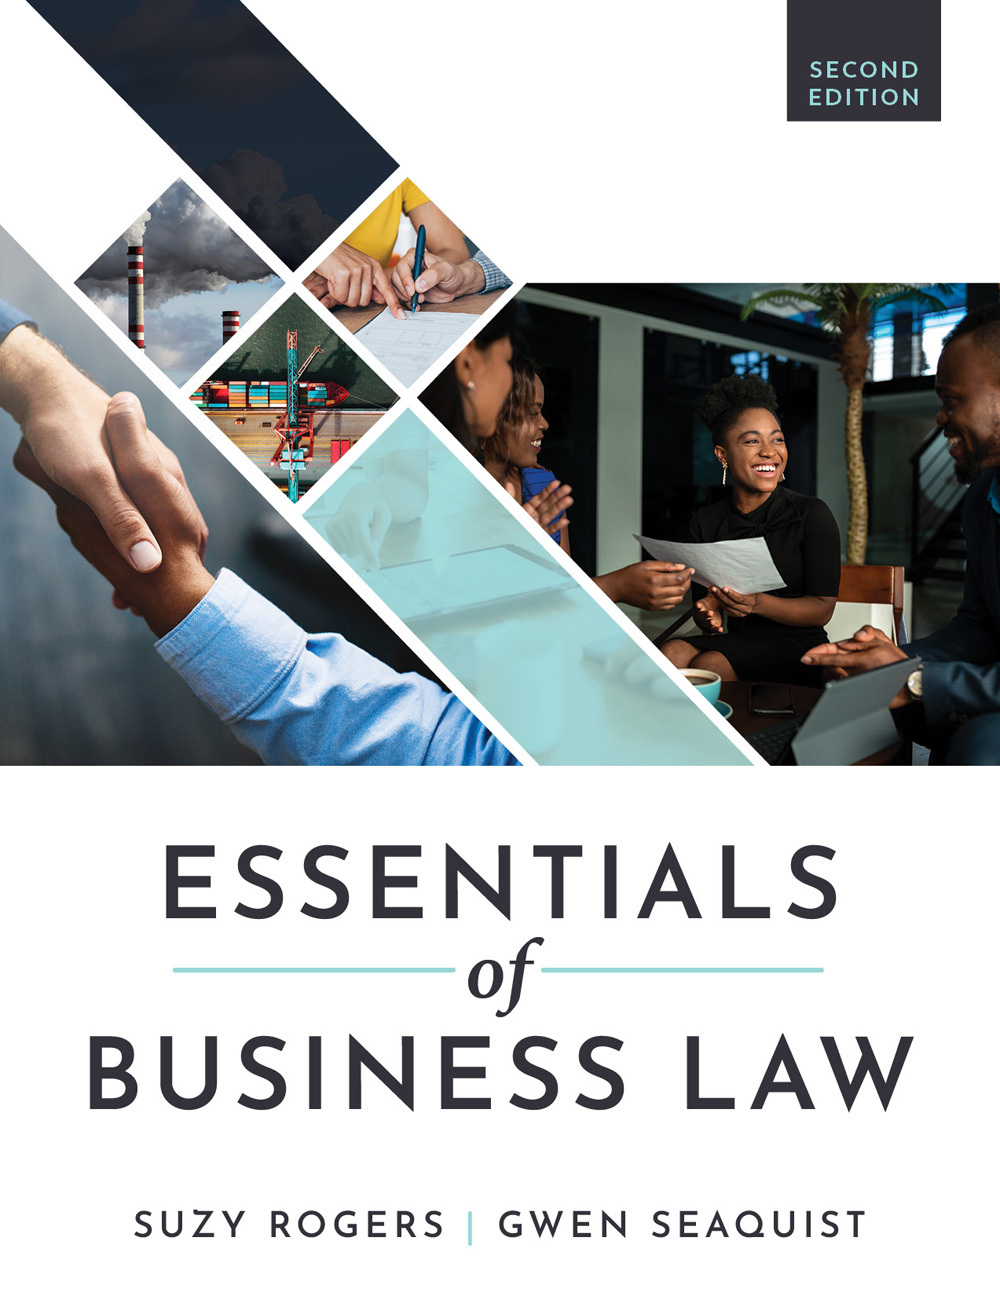 Essentials of Business Law, Second Edition, by Suzy Rogers and Gwen Seaquist